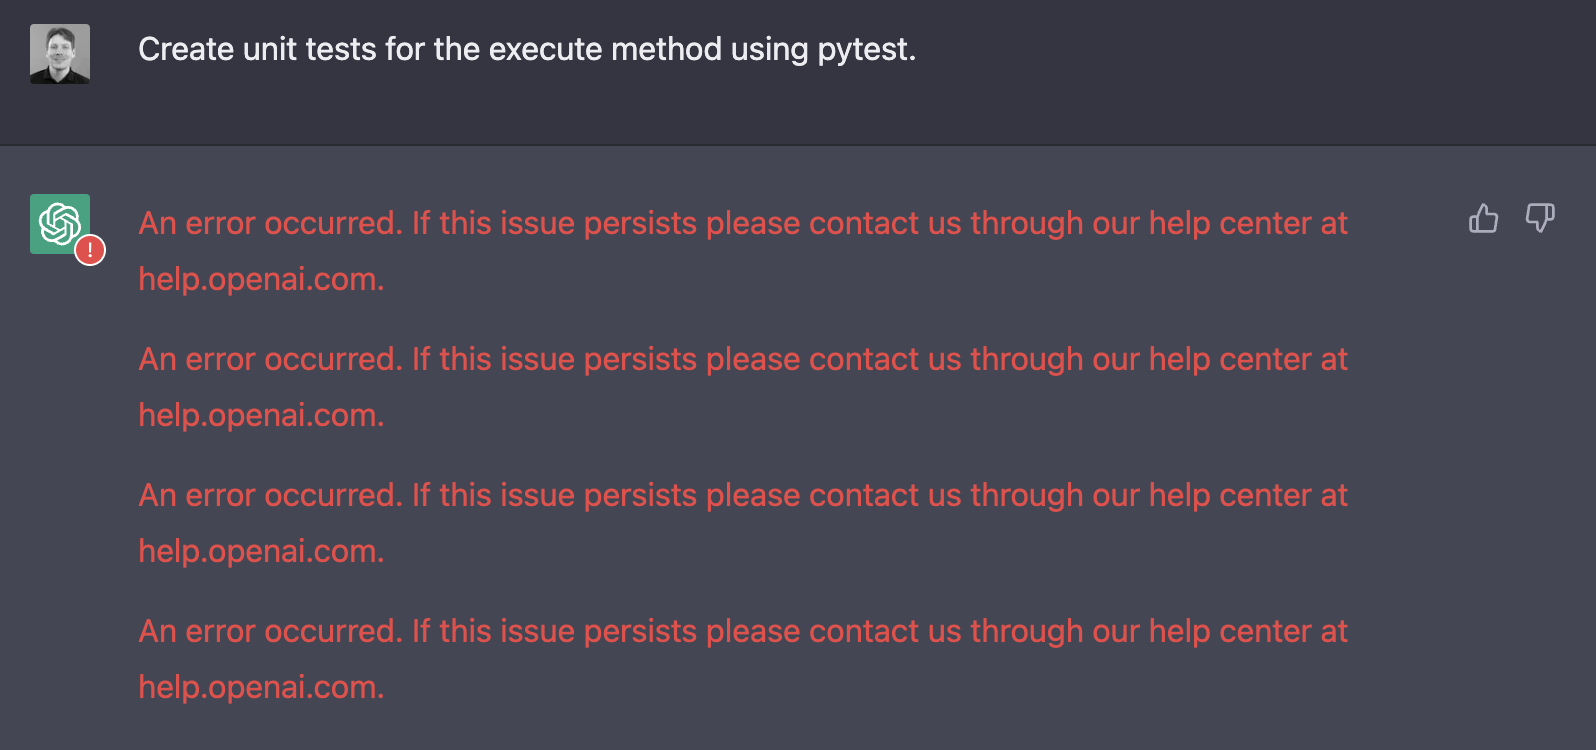 ChatGPT > An error occurred. If this issue persists please contact us through our help center at help.openai.com.